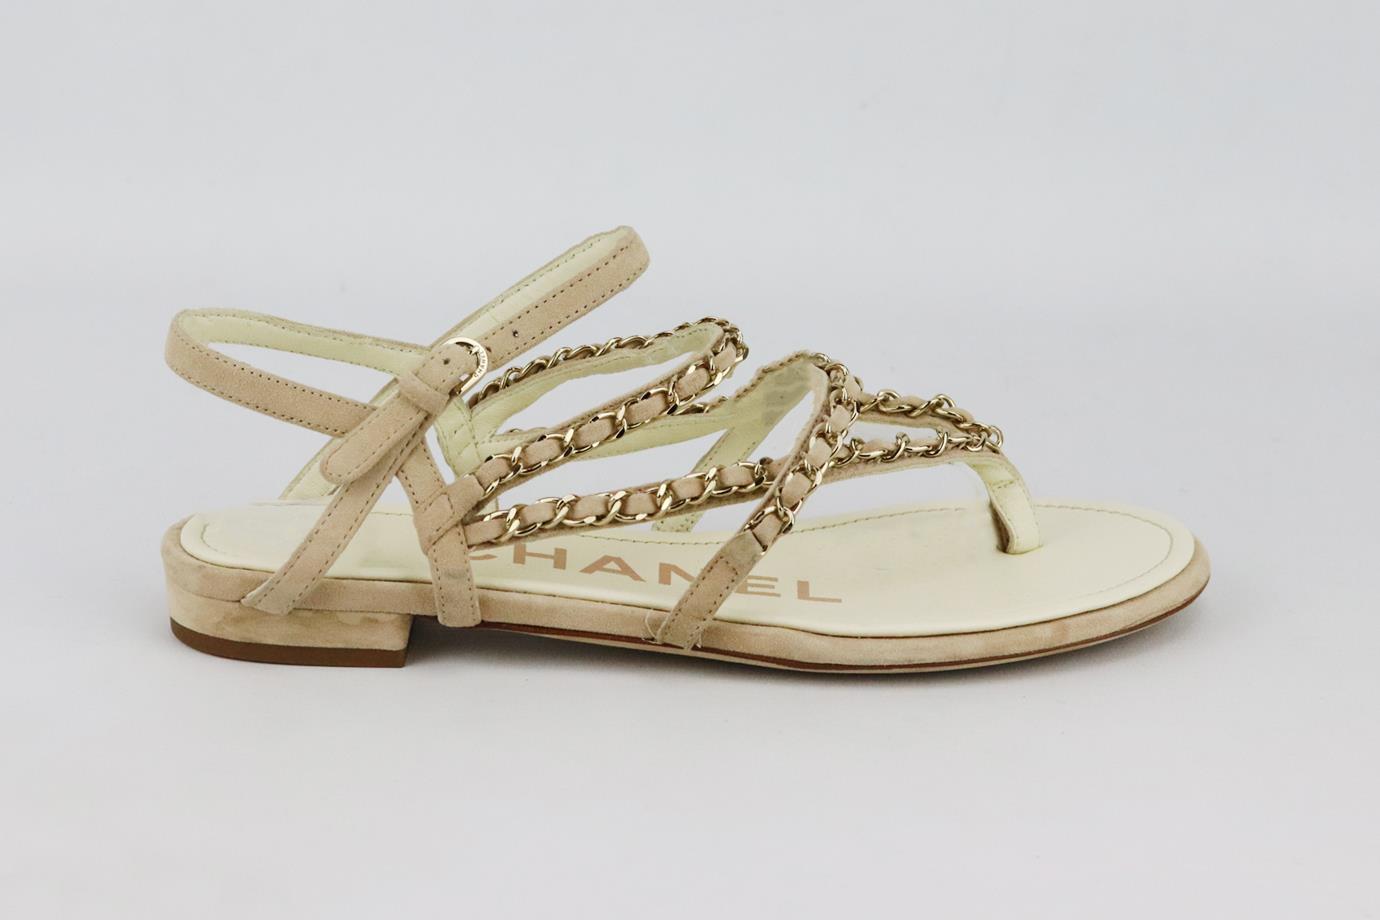 CHANEL CHAIN DETAILED SUEDE SANDALS EU 38 UK 5 US 8